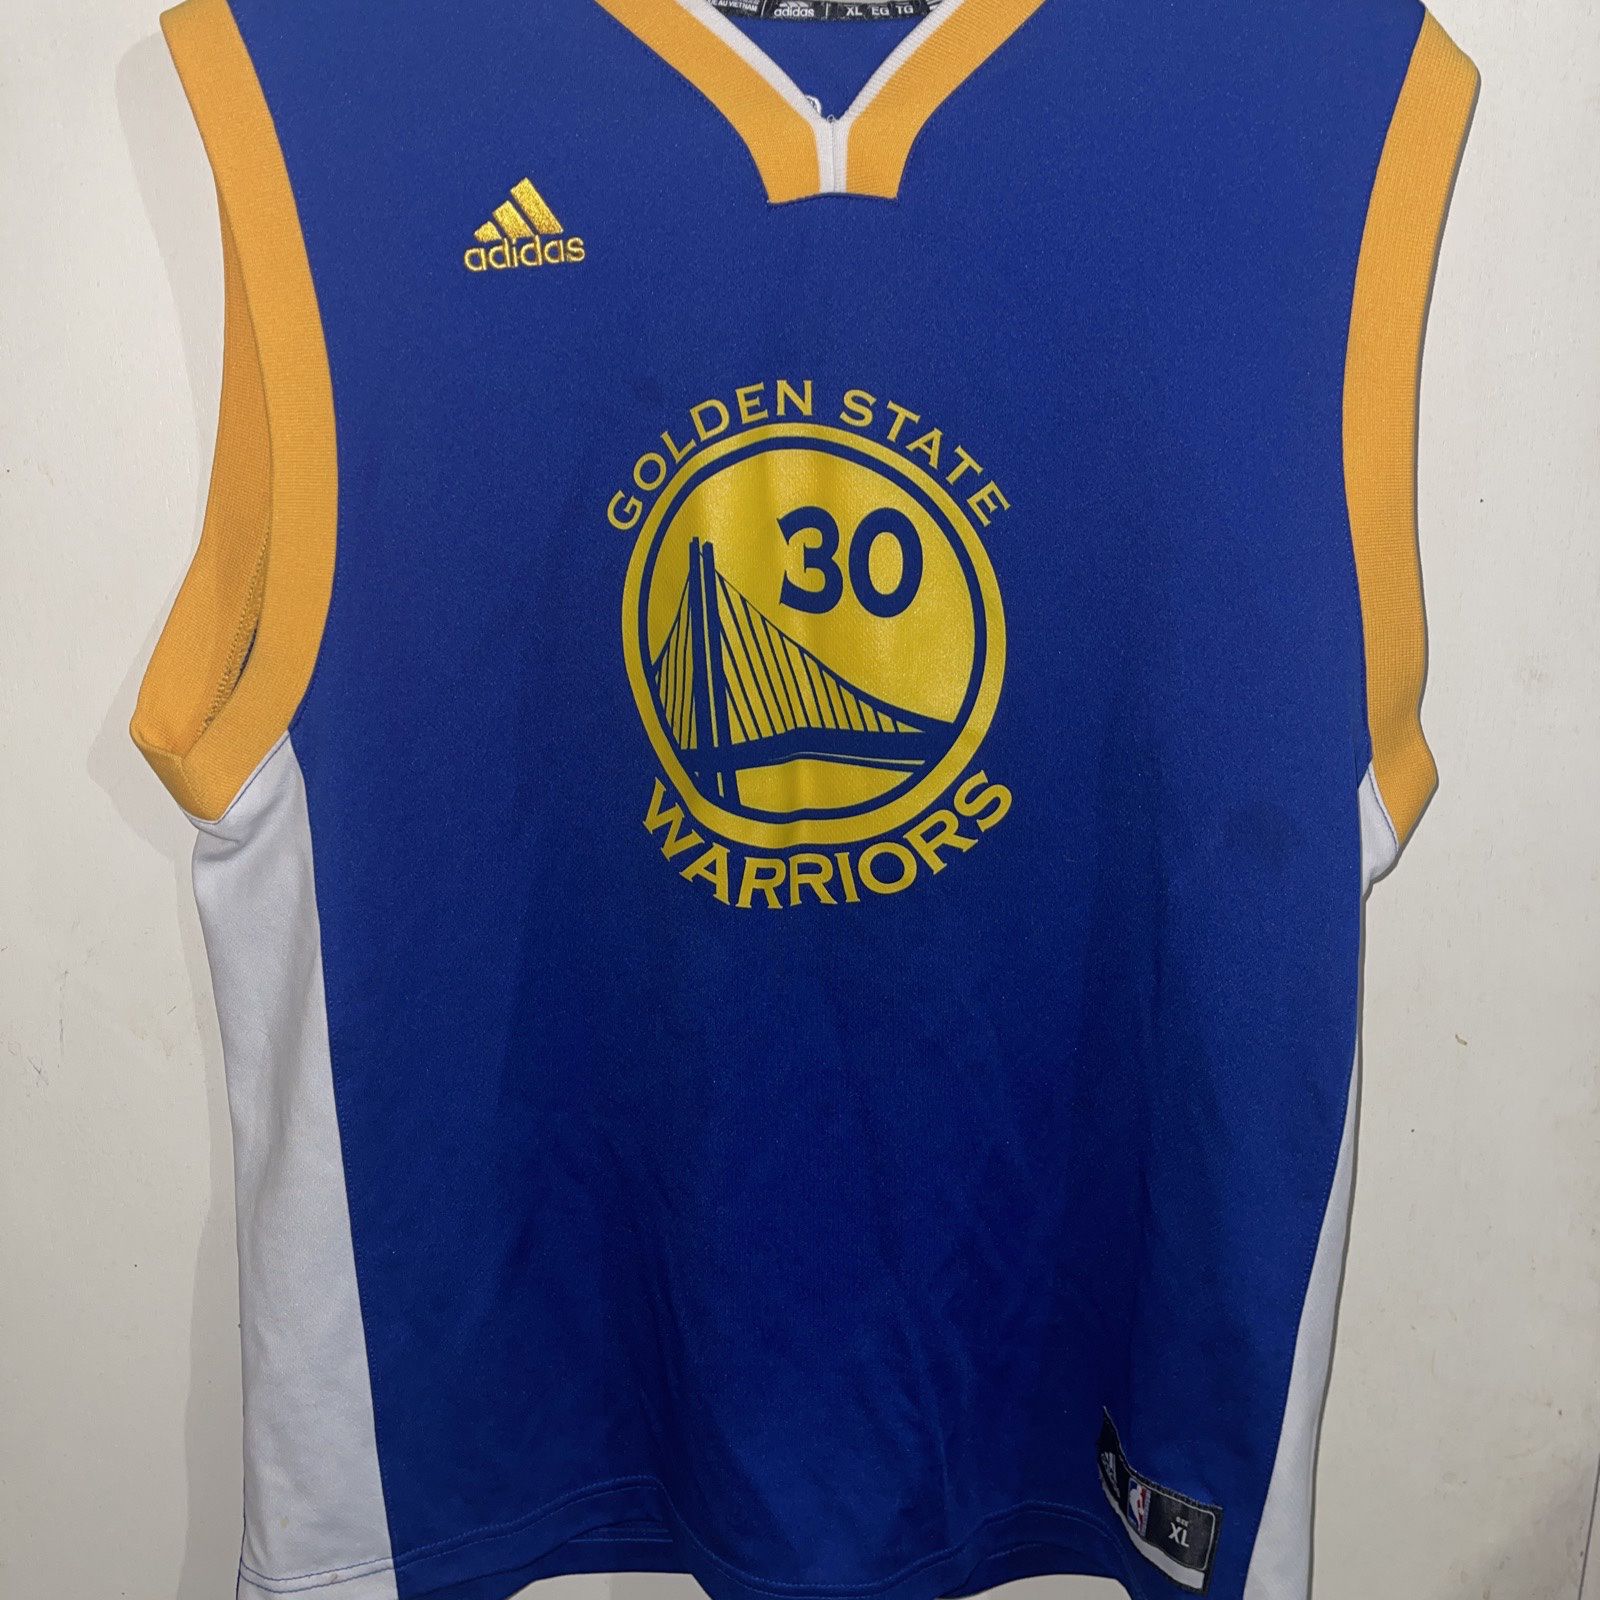 Adidas Stephen Curry #30 Golden State Warriors Jersey, Youth Large